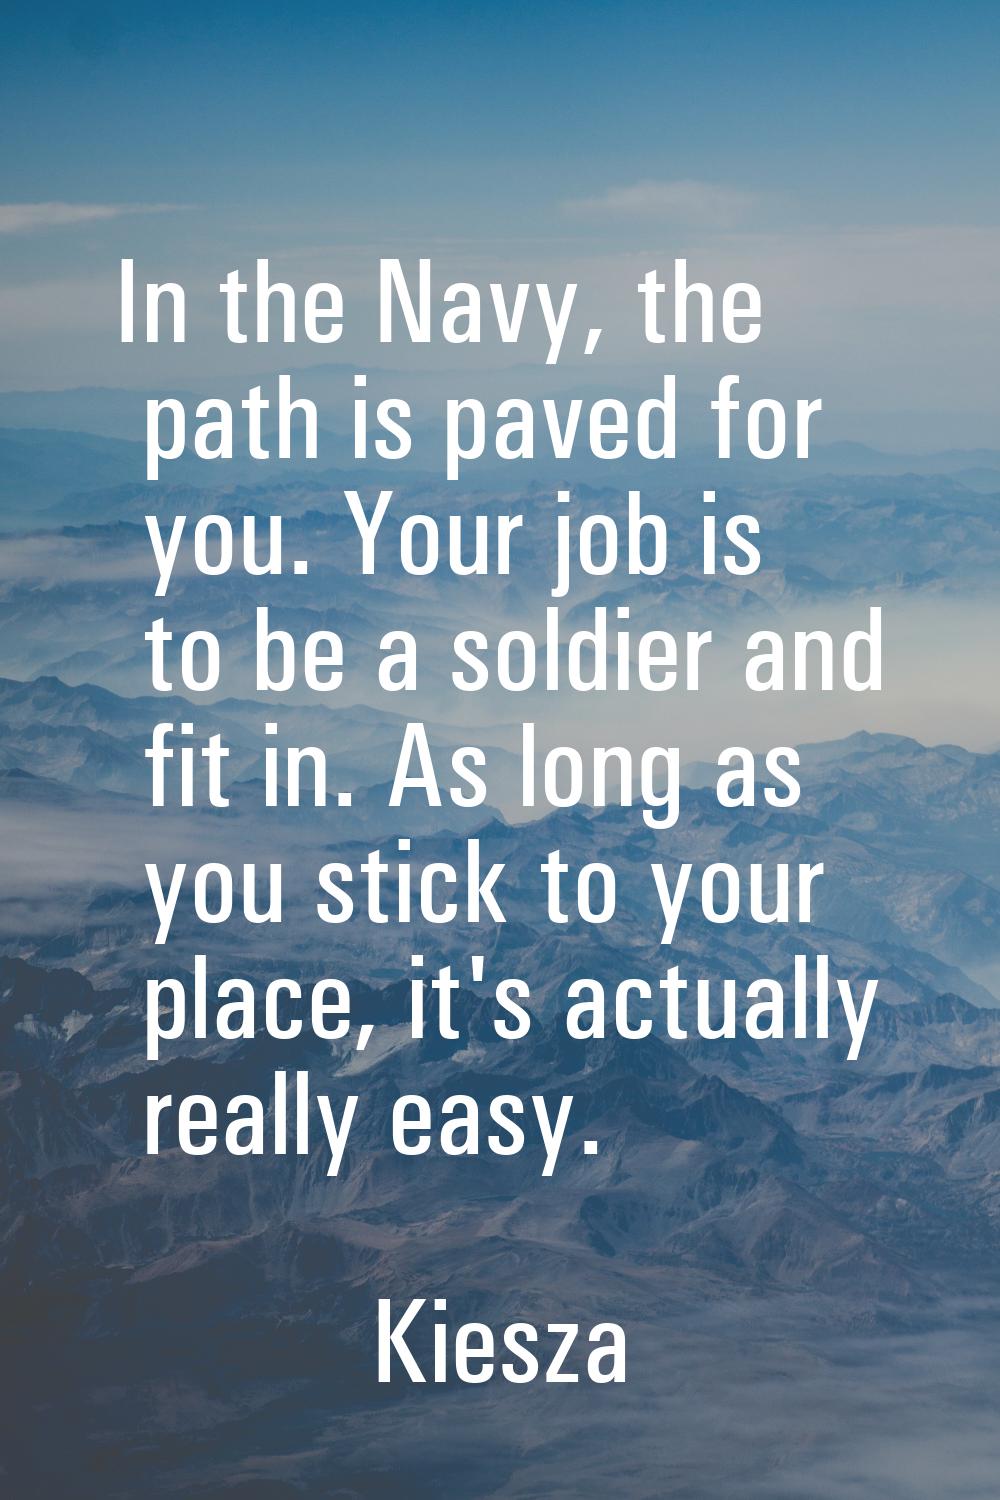 In the Navy, the path is paved for you. Your job is to be a soldier and fit in. As long as you stic